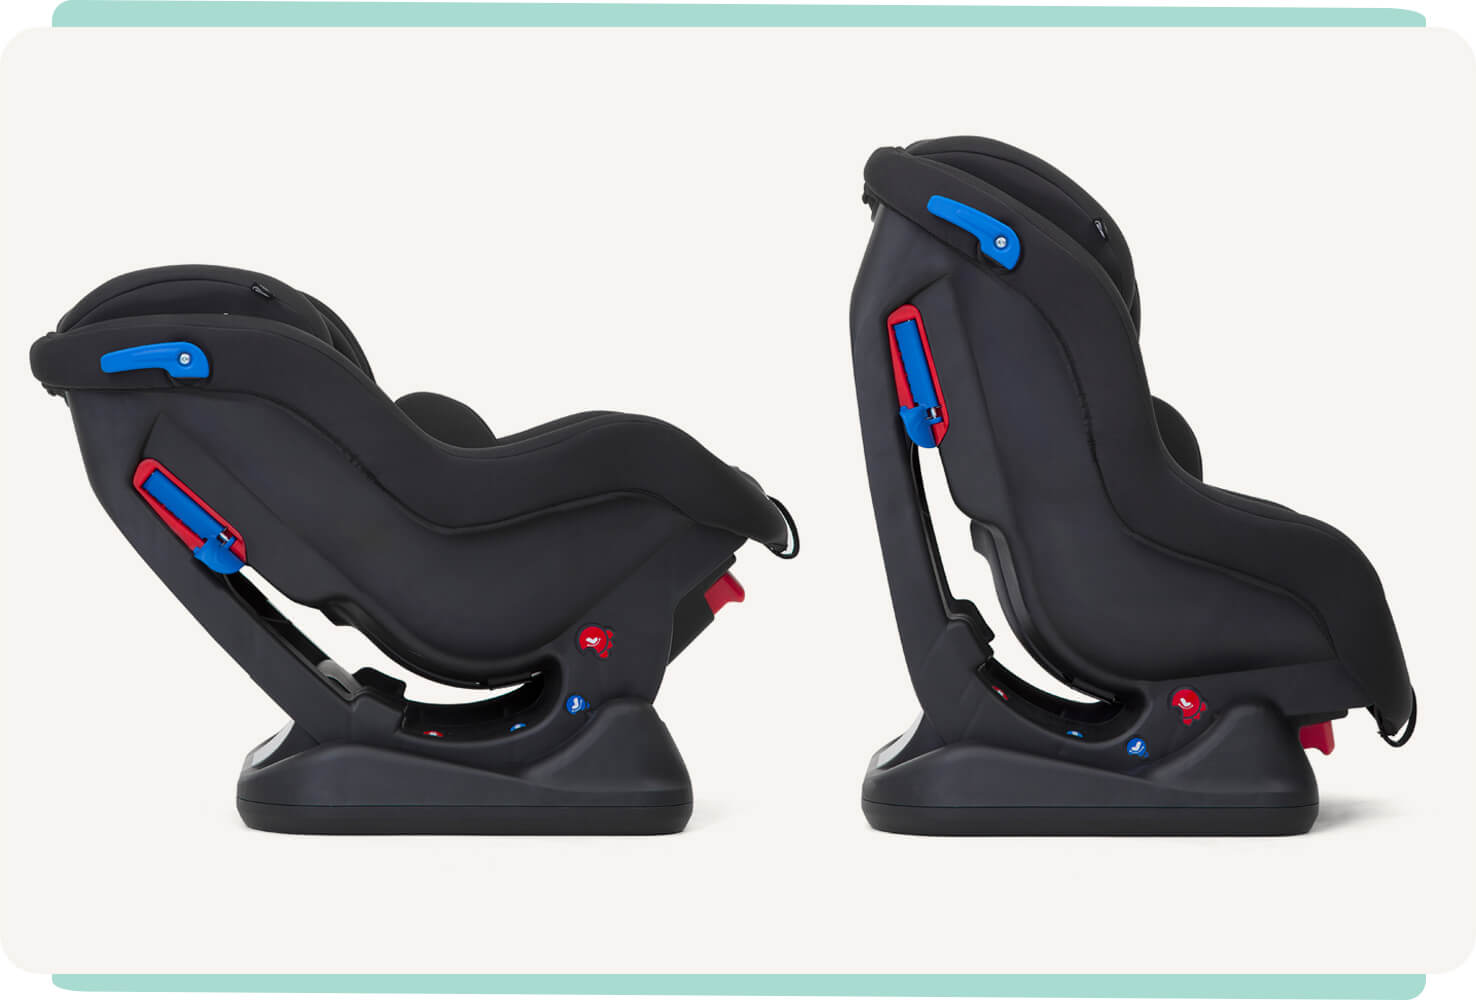 Two Joie Steadi car seat, one on the right that is full reclined postion and one on the right has the highest position headrest with black colour, at a side angle.